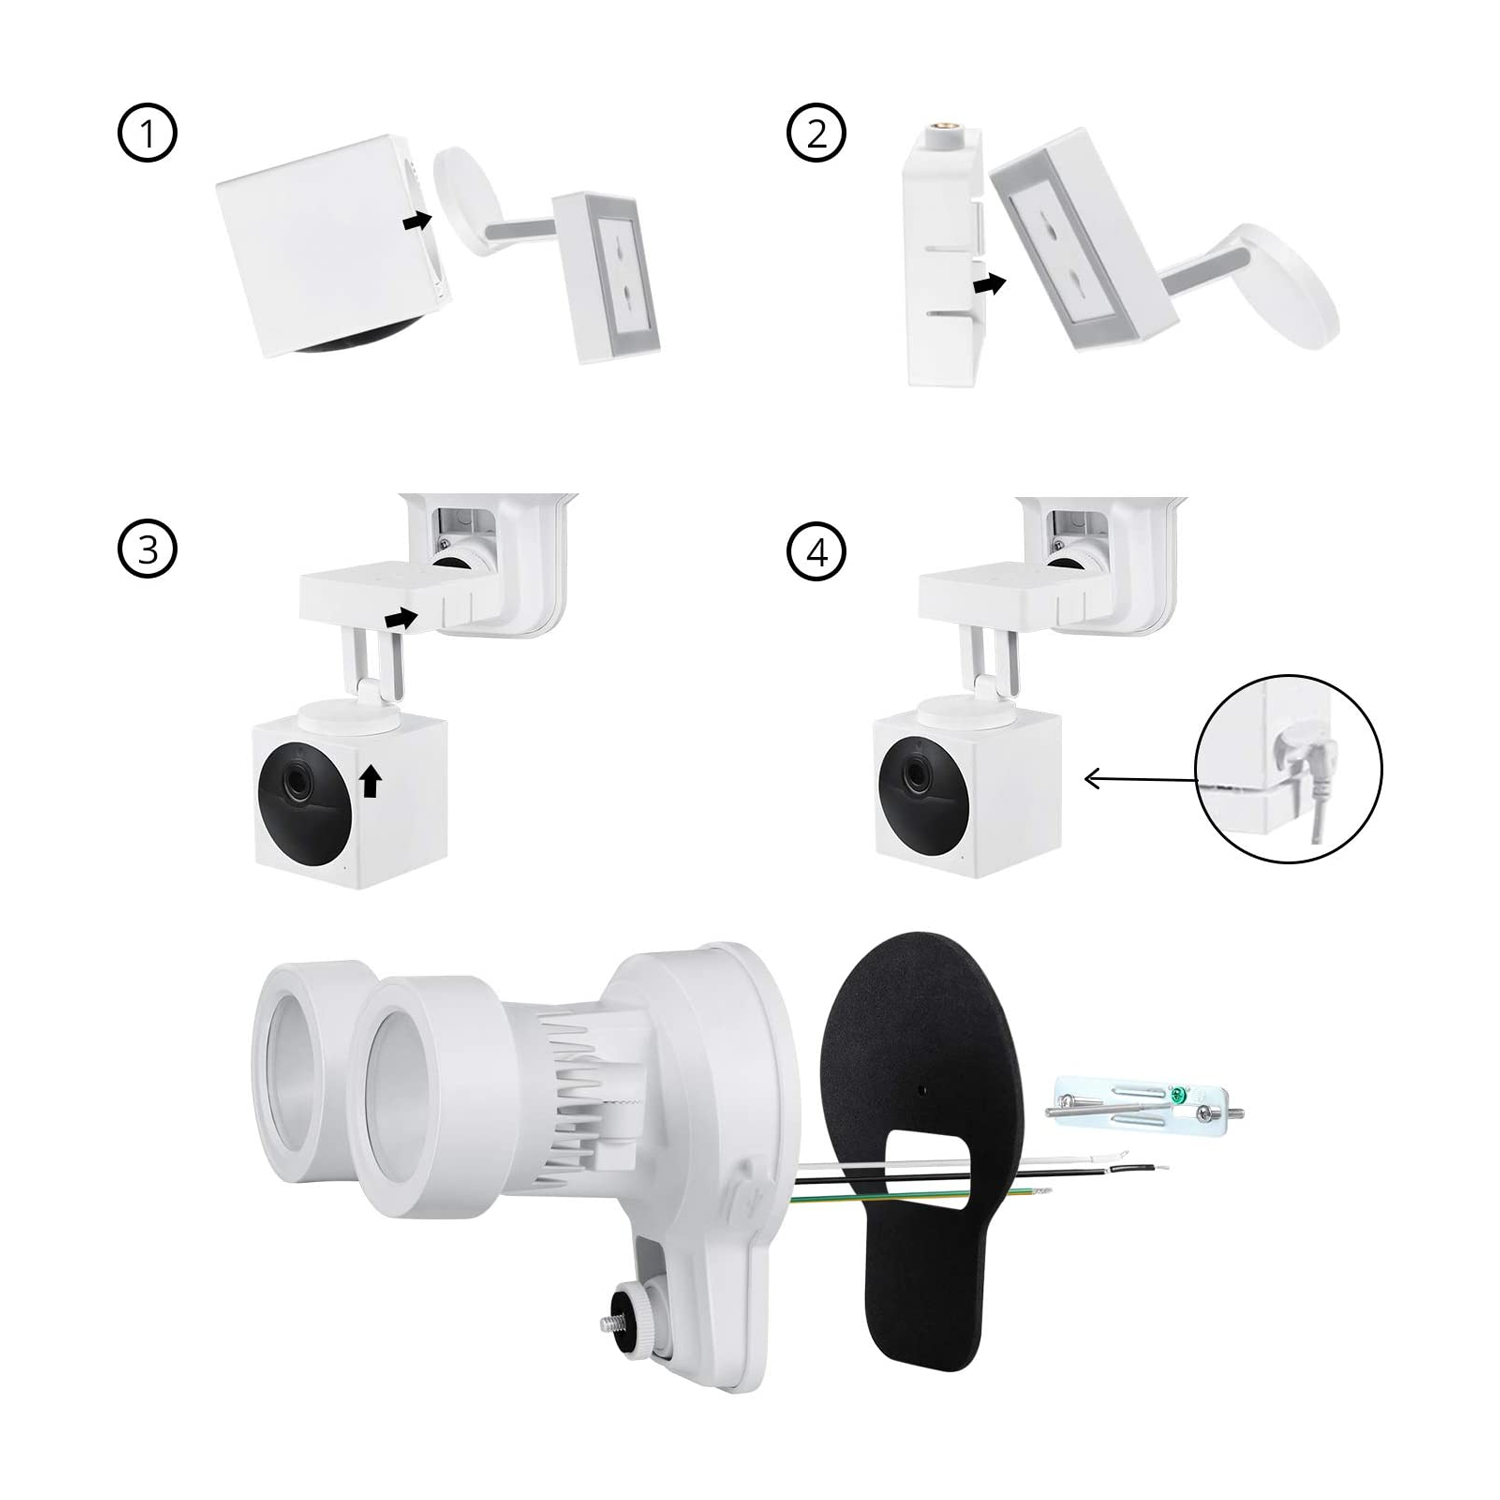 Wasserstein Wyze Cam Outdoor Floodlight Charger White Swivel Tilting Security Camera Wall and Ceiling Mount